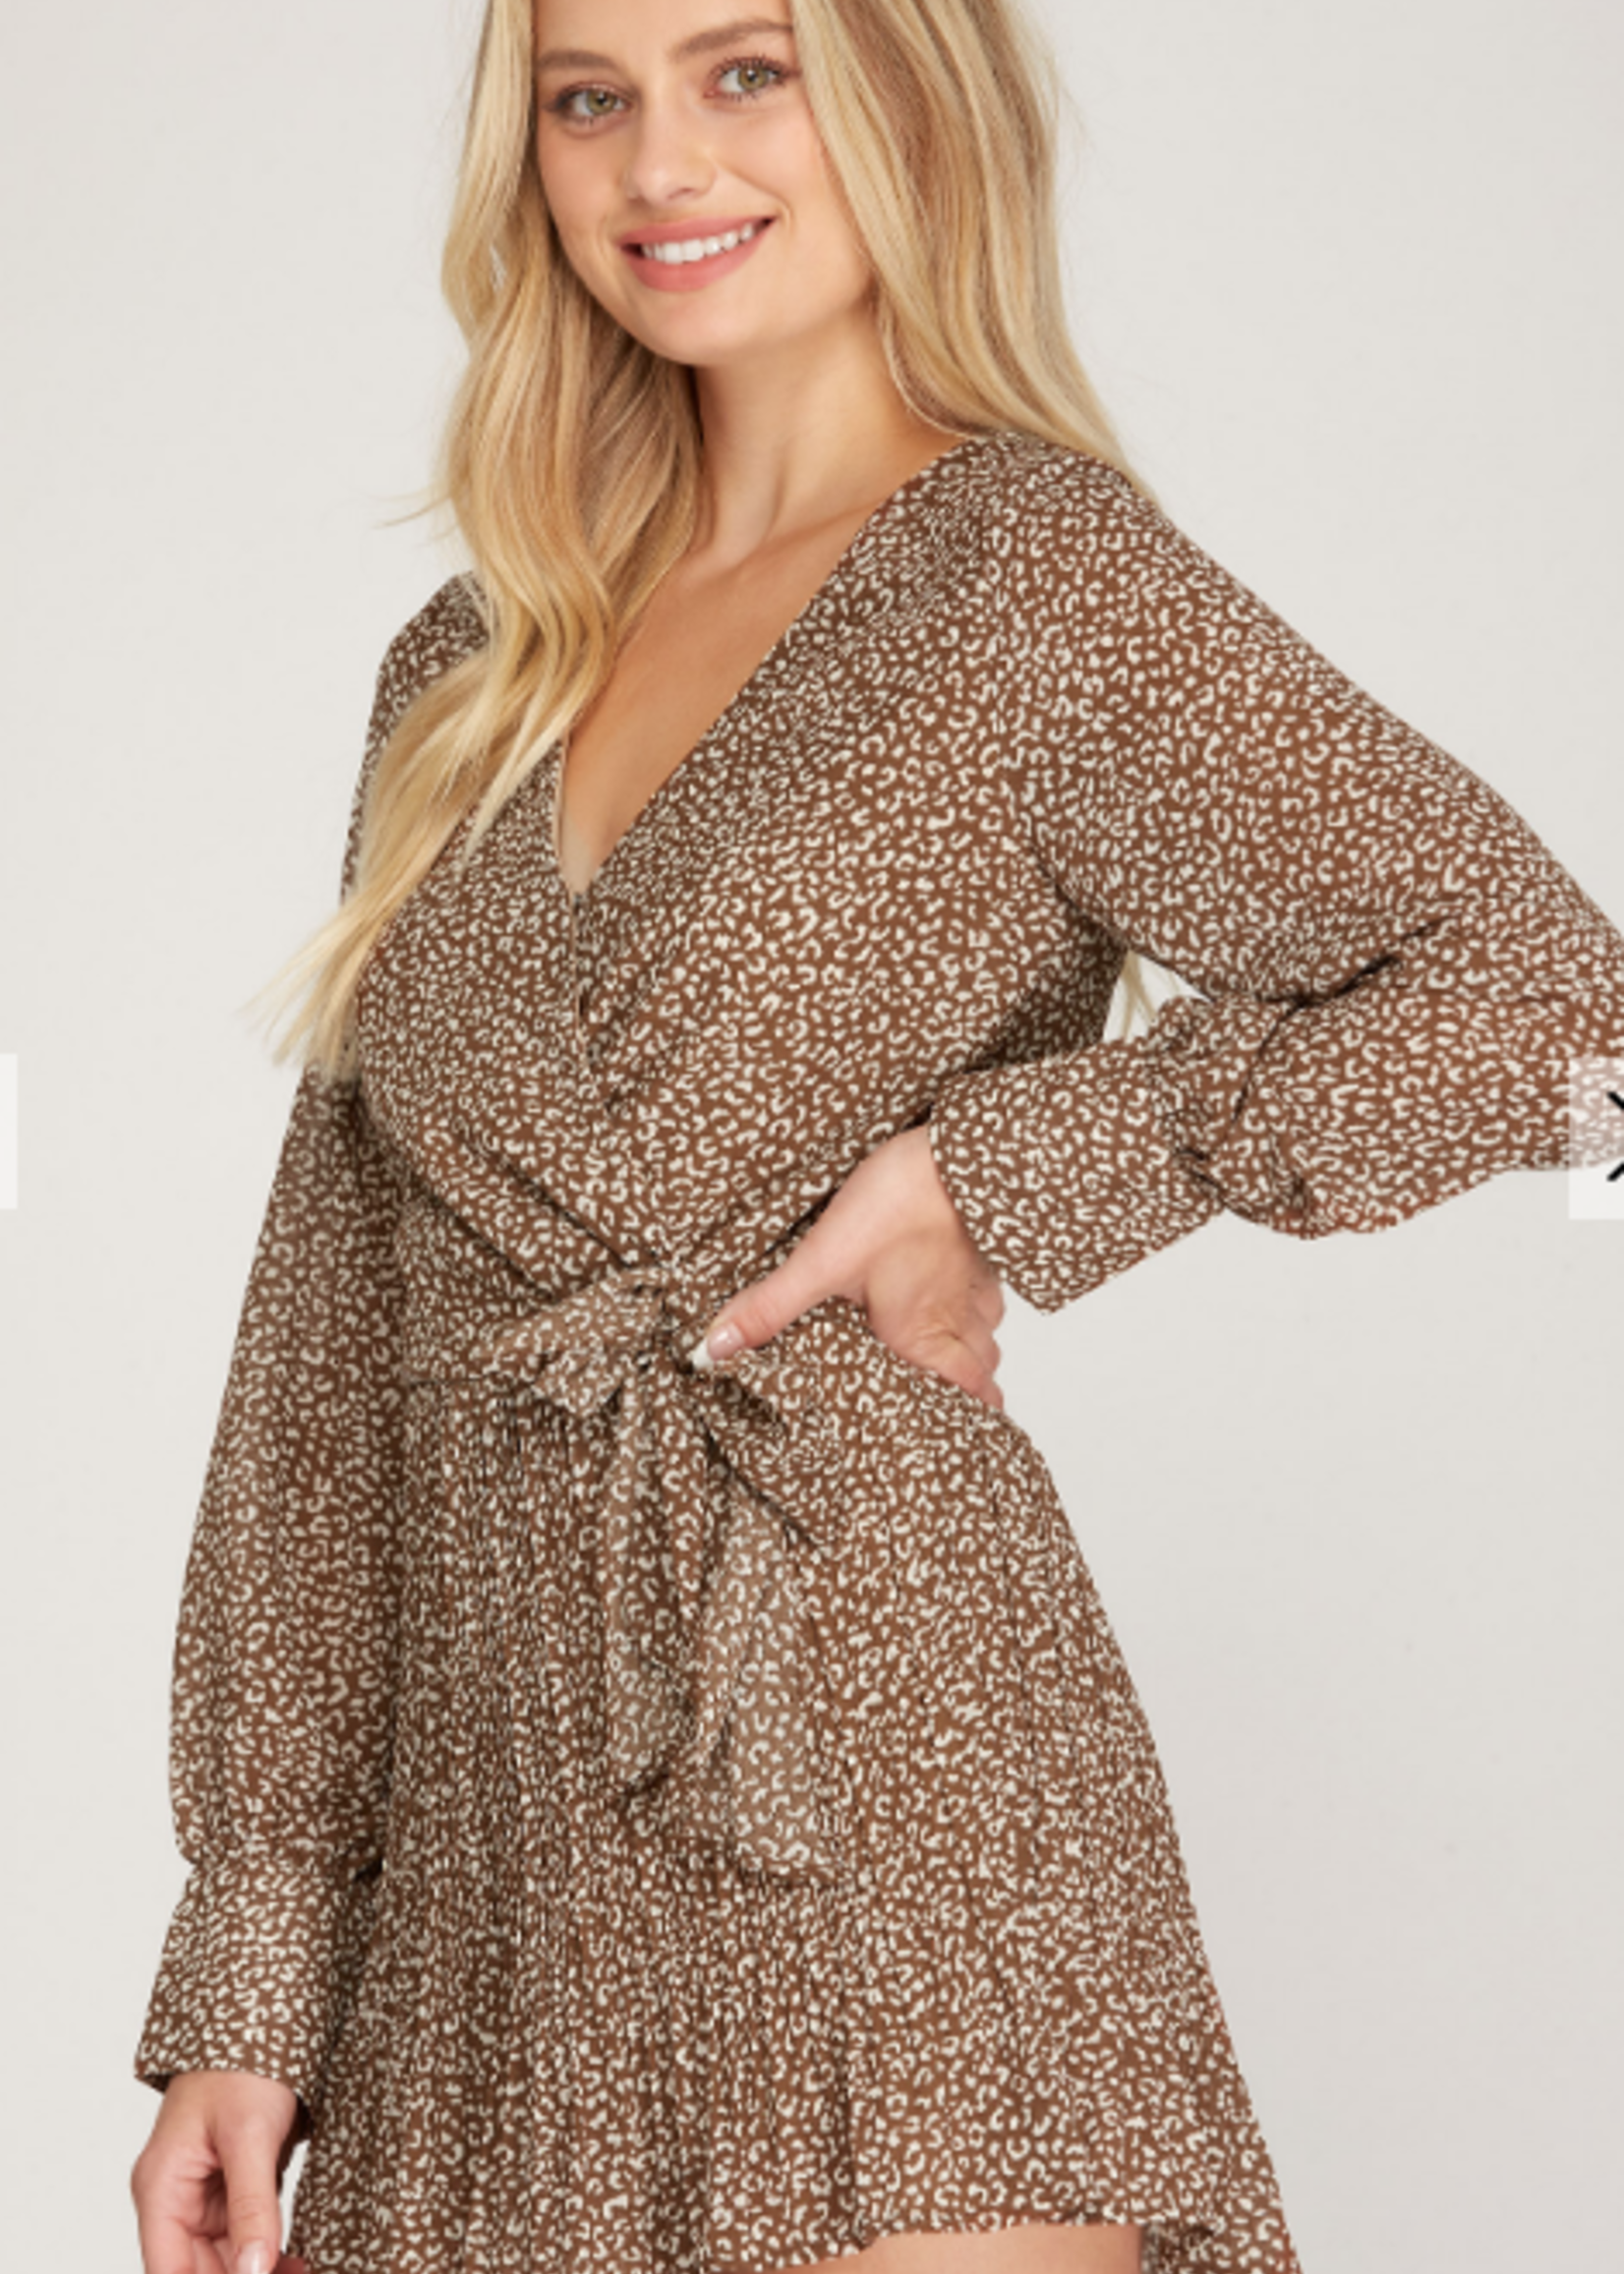 Call Of The Wild Romper (2 Colors)